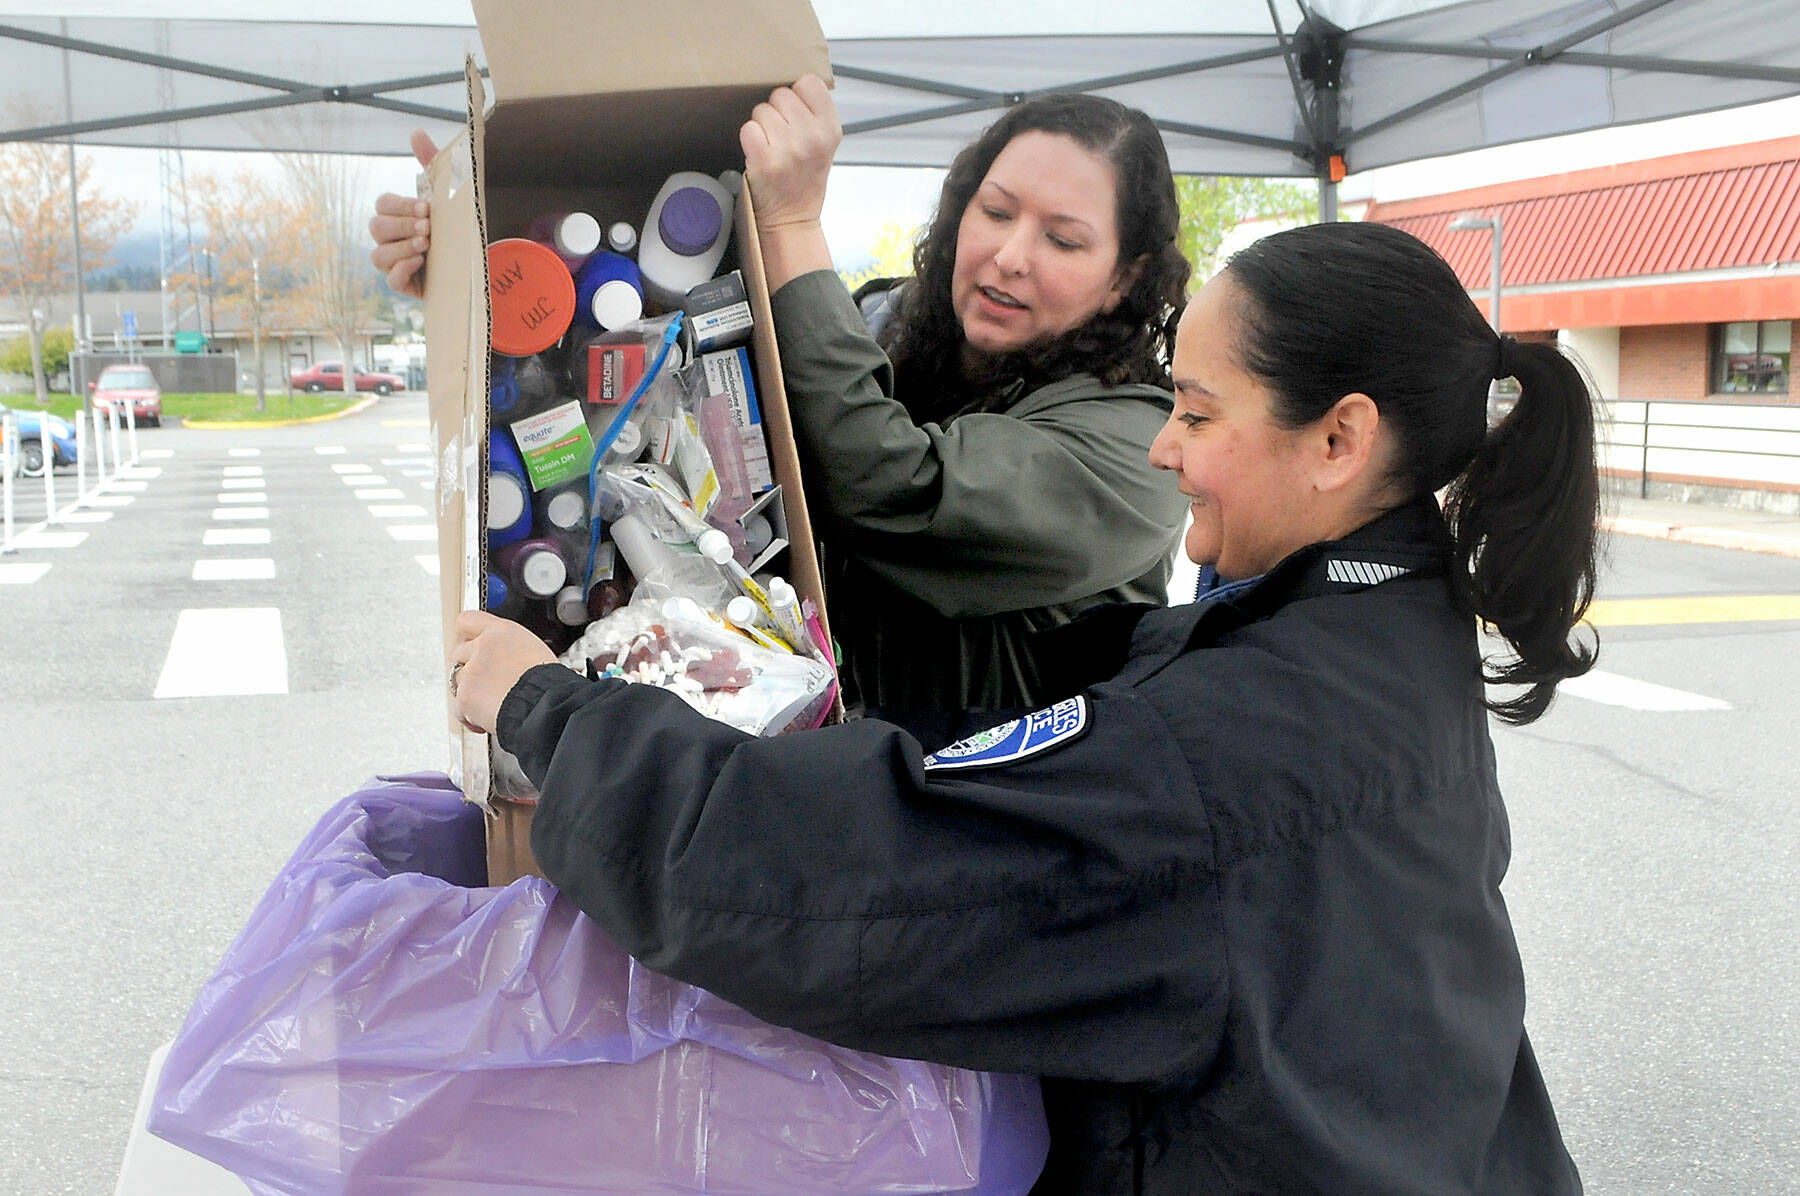 Nicole Salim, evidence manager for the Clallam County Sheriff’s Office, left, and Detective Swift Sanchez of the Port Angeles Police Department dump medicines into a collection box during National Prescription Drug Take Back Day on Saturday at a drop-off site at the Clallam County Courthouse in Port Angeles. At the event, people were allowed to anonymously bring in expired, unused and unwanted prescription drugs for safe disposal. Similar drop-off sites on the North Olympic Peninsula were set for Sequim, Quilcene and Port Hadlock. (Keith Thorpe/Peninsula Daily News)